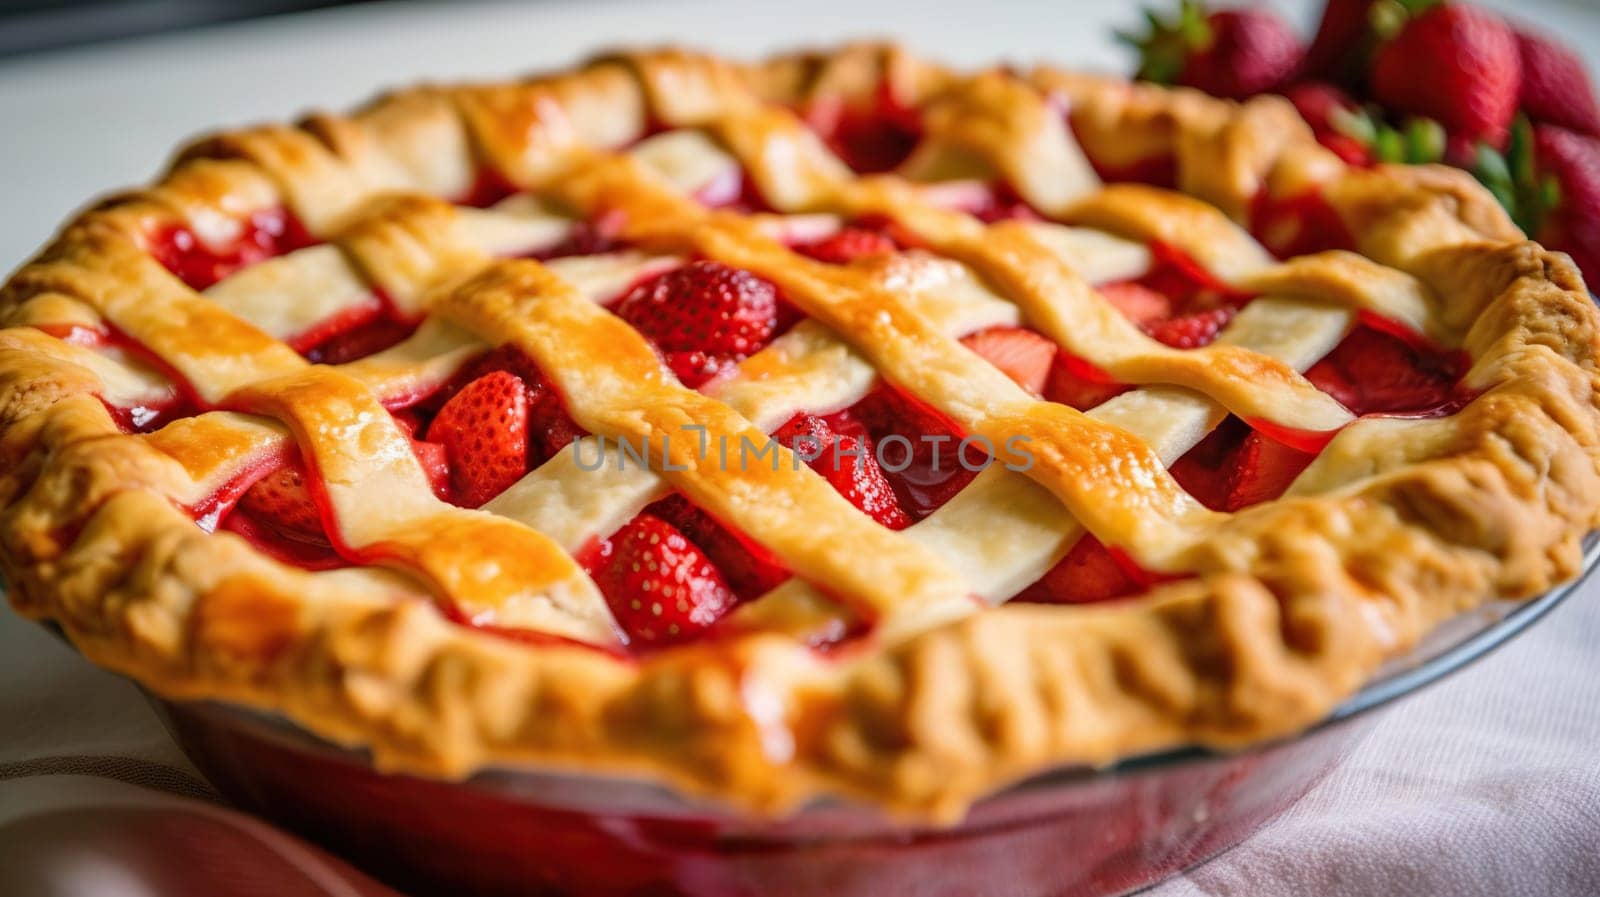 Freshly Baked Strawberry Pie With Lattice Crust on a Kitchen Counter by chrisroll